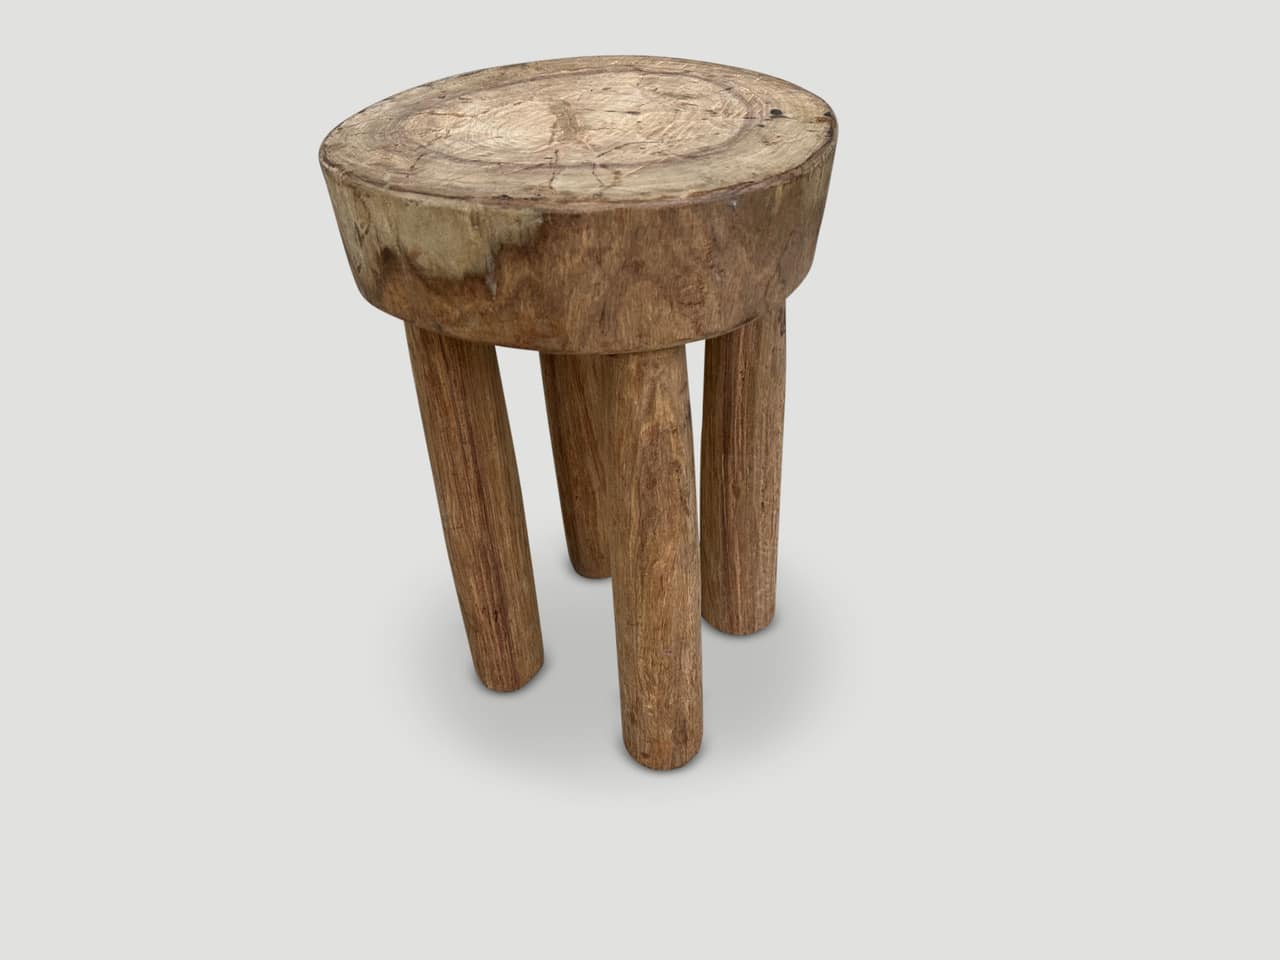 SENUFO SIDE TABLE OR STOOL FROM COTE D’IVOIRE